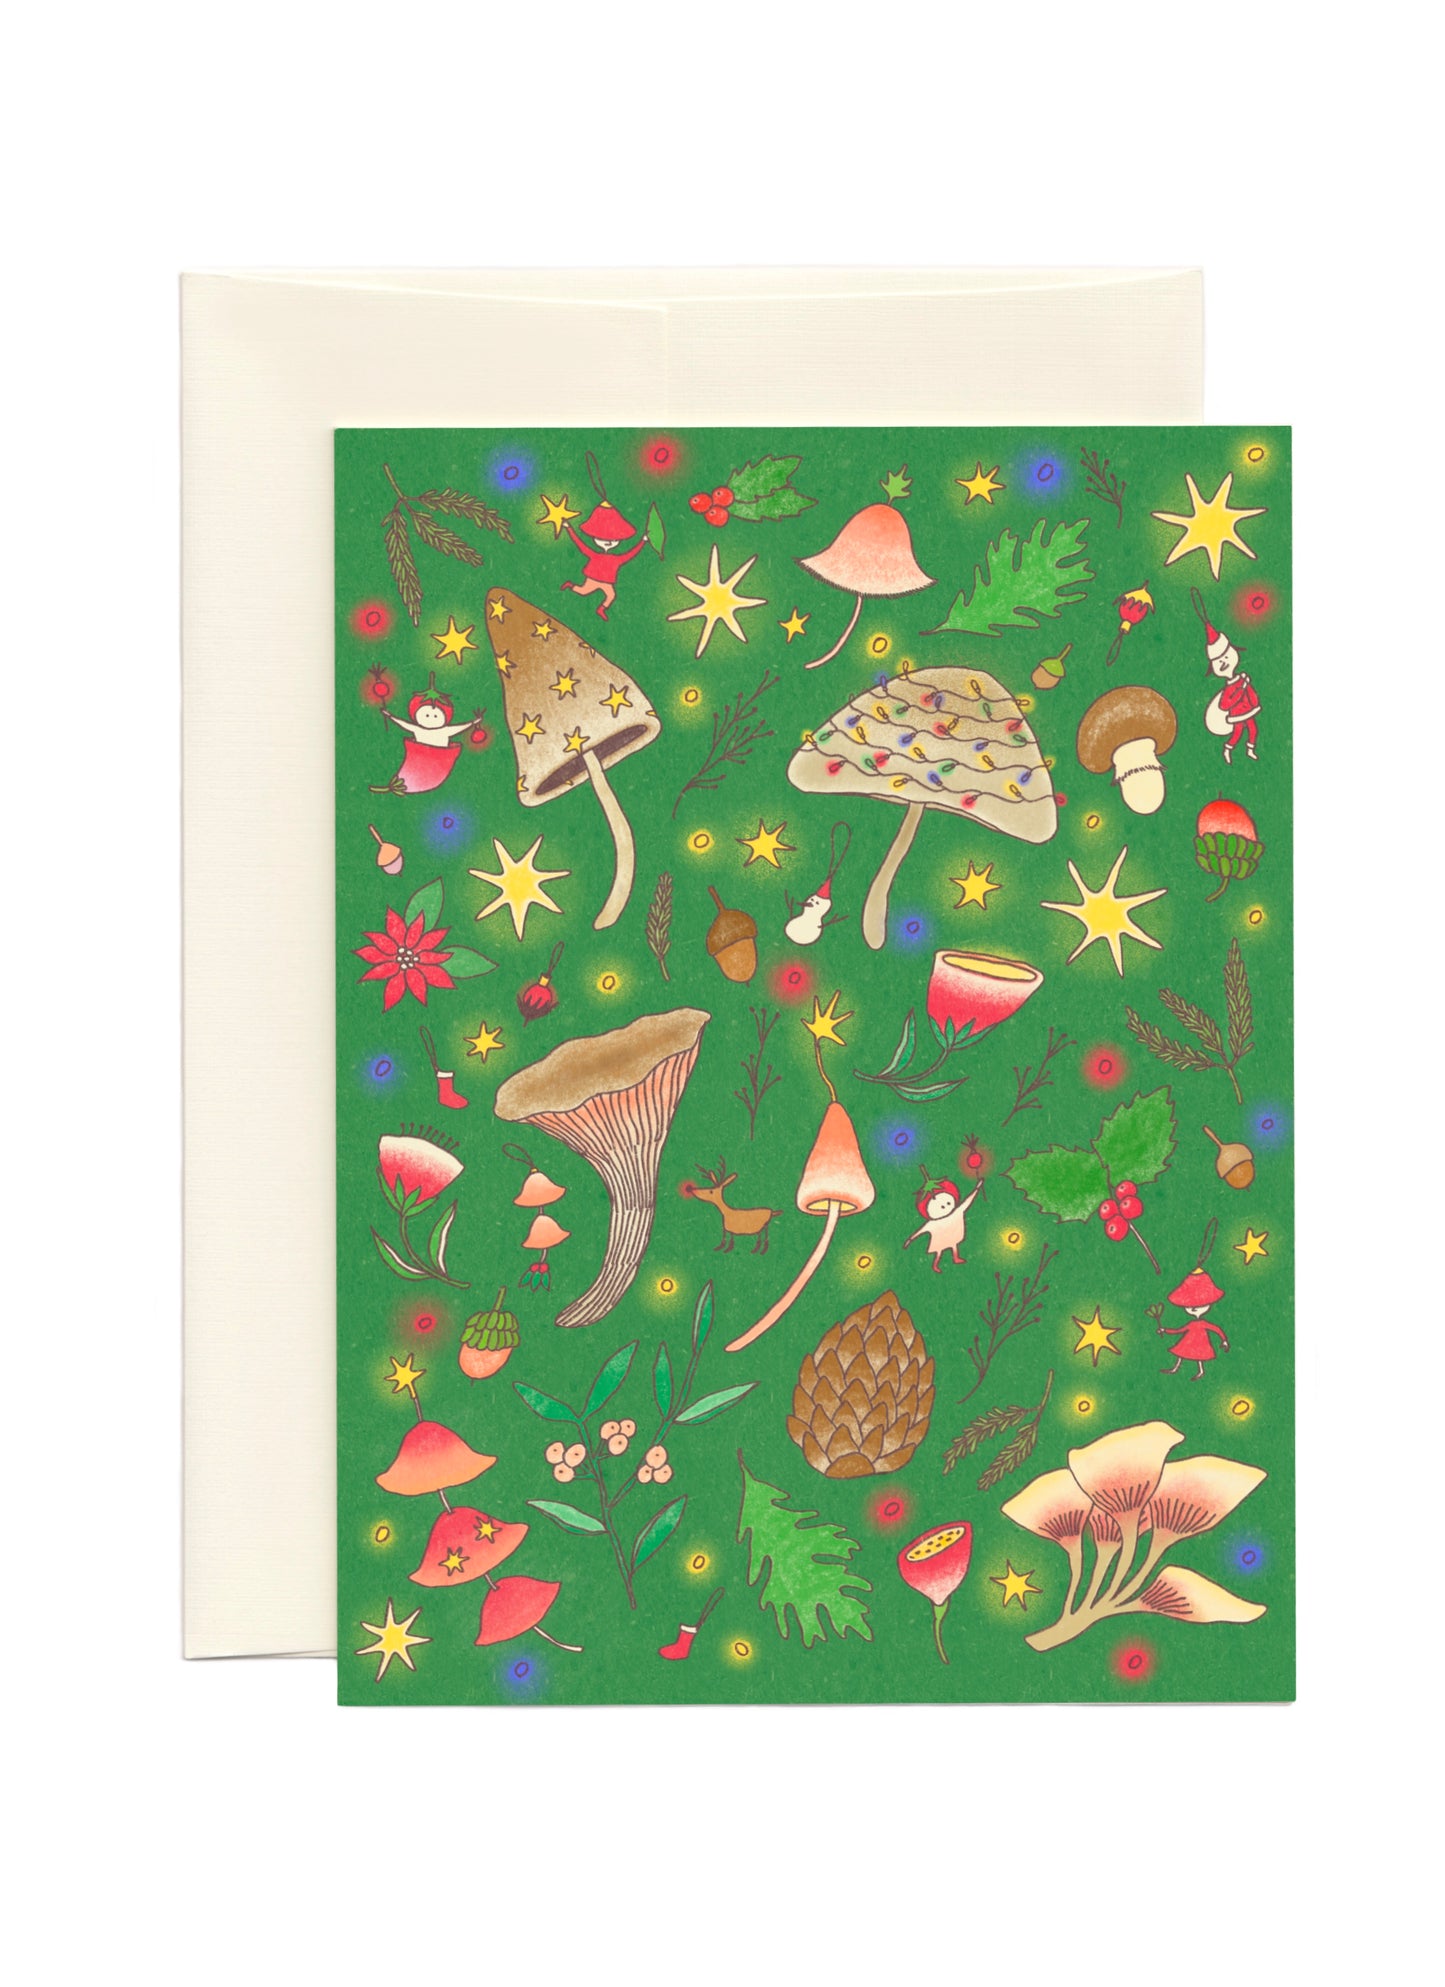 Green Christmas Card with variety of mushrooms, winter plants and little Christmas tree decorations